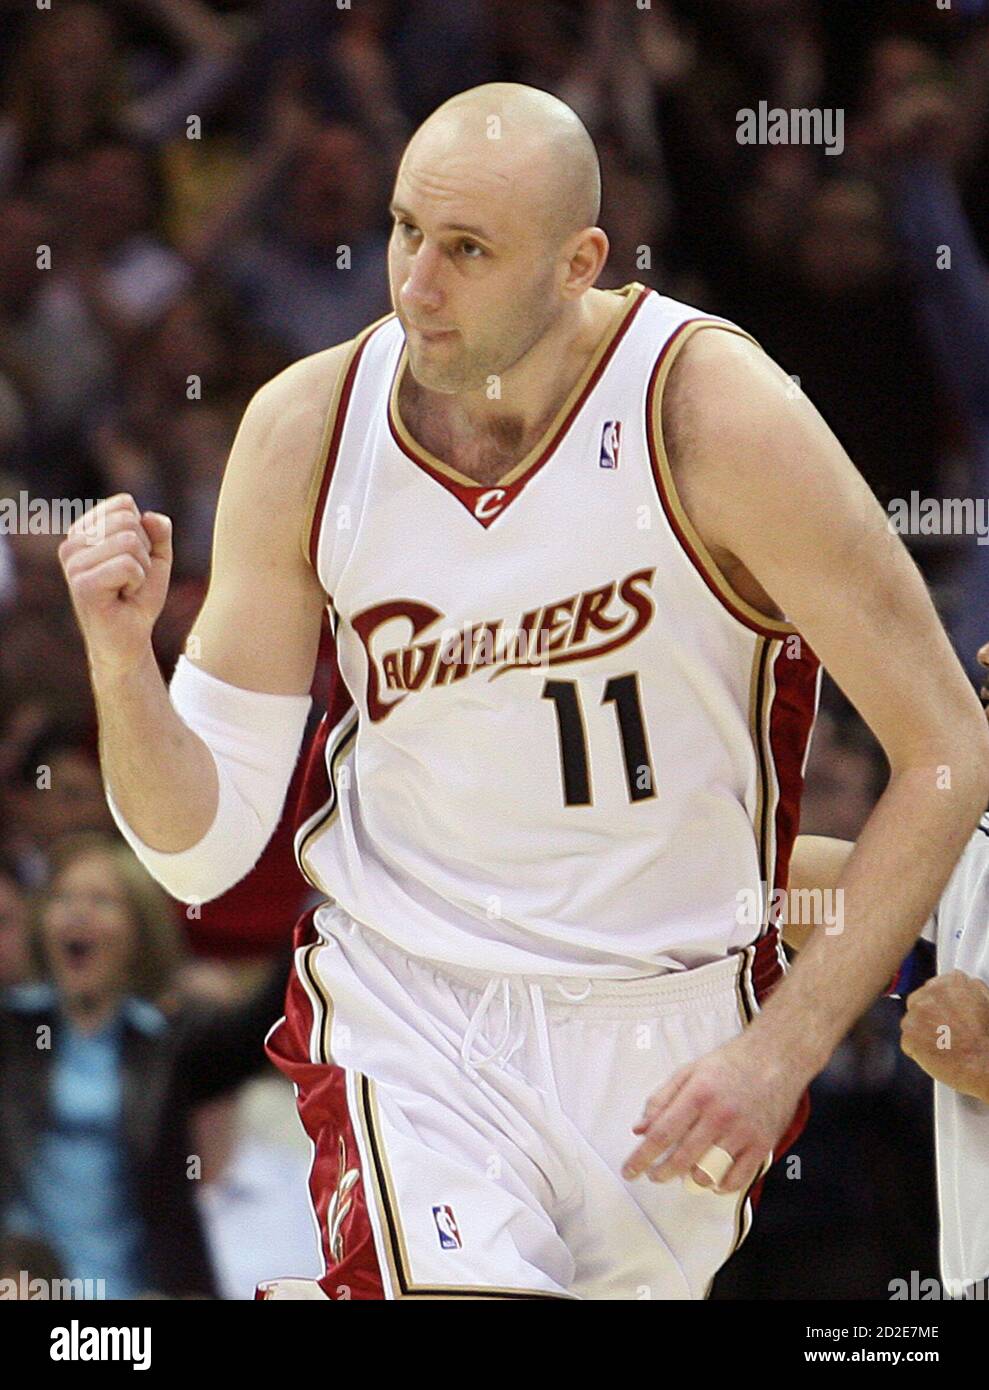 Cleveland Cavaliers' Zydrunas Ilgauskas pumps his fist after hitting a  three point shot in the fourth quarter of their NBA basketball game against  the Detroit Pistons in Cleveland March 19, 2008. REUTERS/Aaron